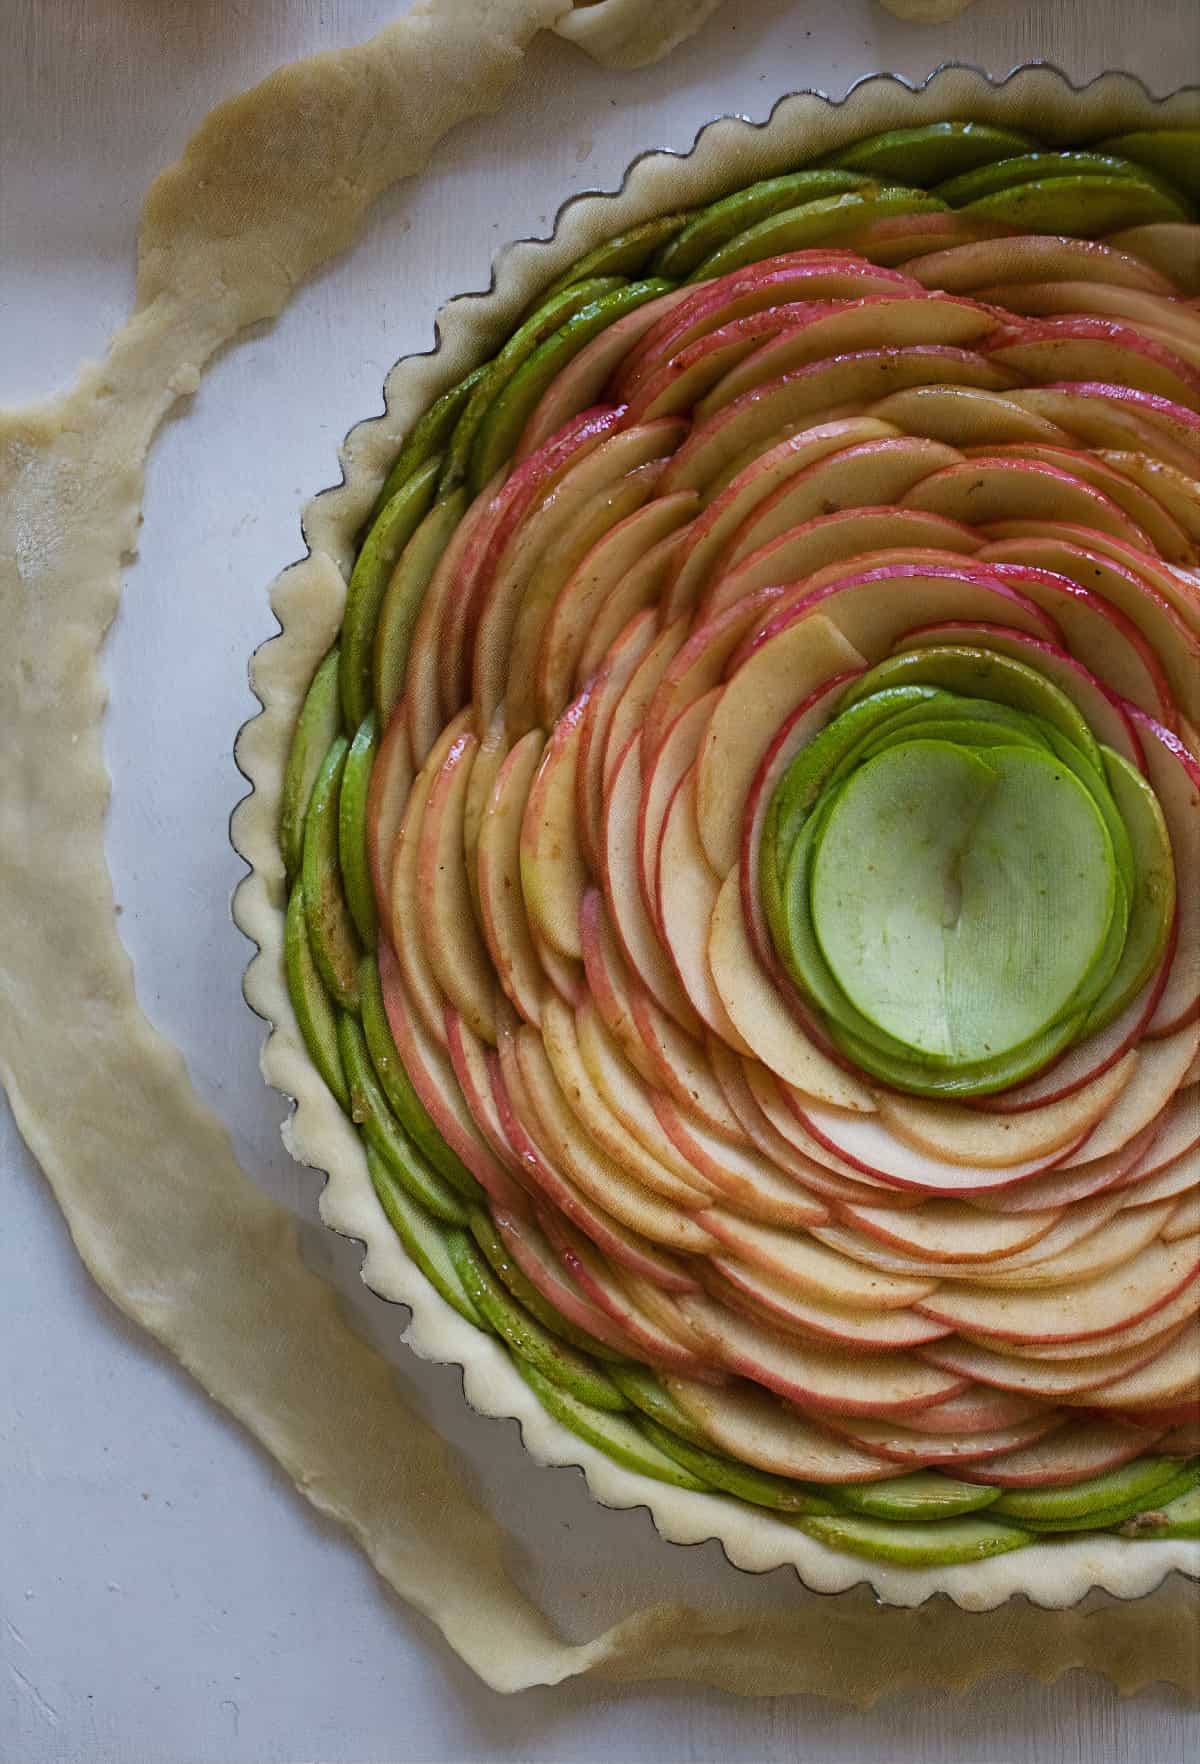 Pie being assembled with apples going all the way around.